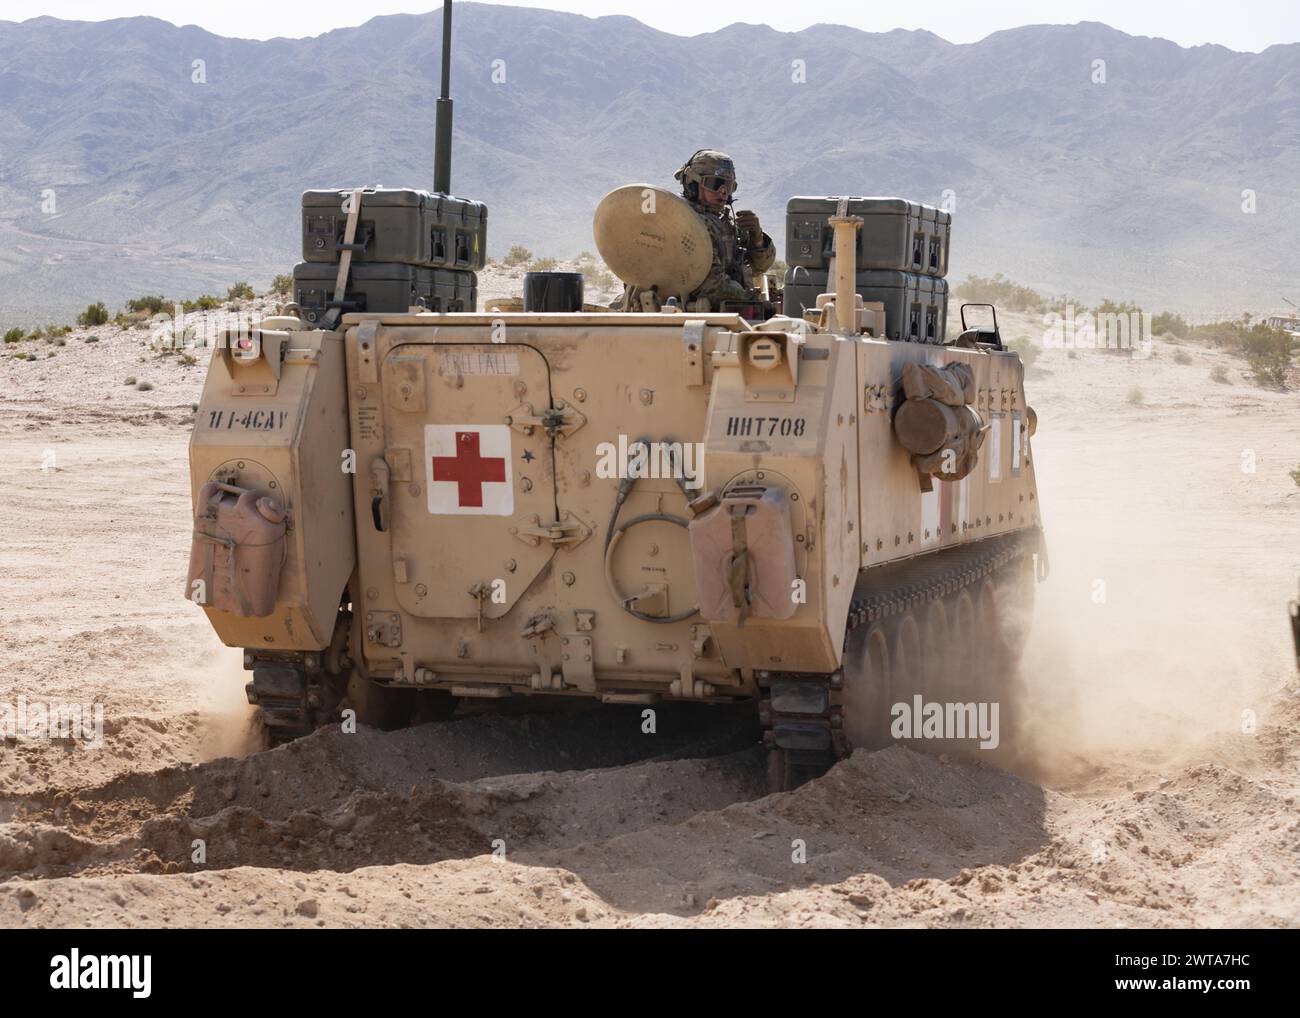 U.S. Army Soldiers assigned to the 1st Infantry Division deliver simulated patients in an M113 armored personnel carrier for triage during ongoing experimentation of new medical capabilities during Project Convergence – Capstone 4 in Fort Irwin, Calif., March 14, 2024. The experiments bring new technology that can conduct initial trauma care to incoming patients and provide advanced trauma management and surgery in an operational environment.     PC-C4 is an U.S. Army-hosted Joint and Multinational experiment integrating modernization capabilities and formations through persistent experimentat Stock Photo